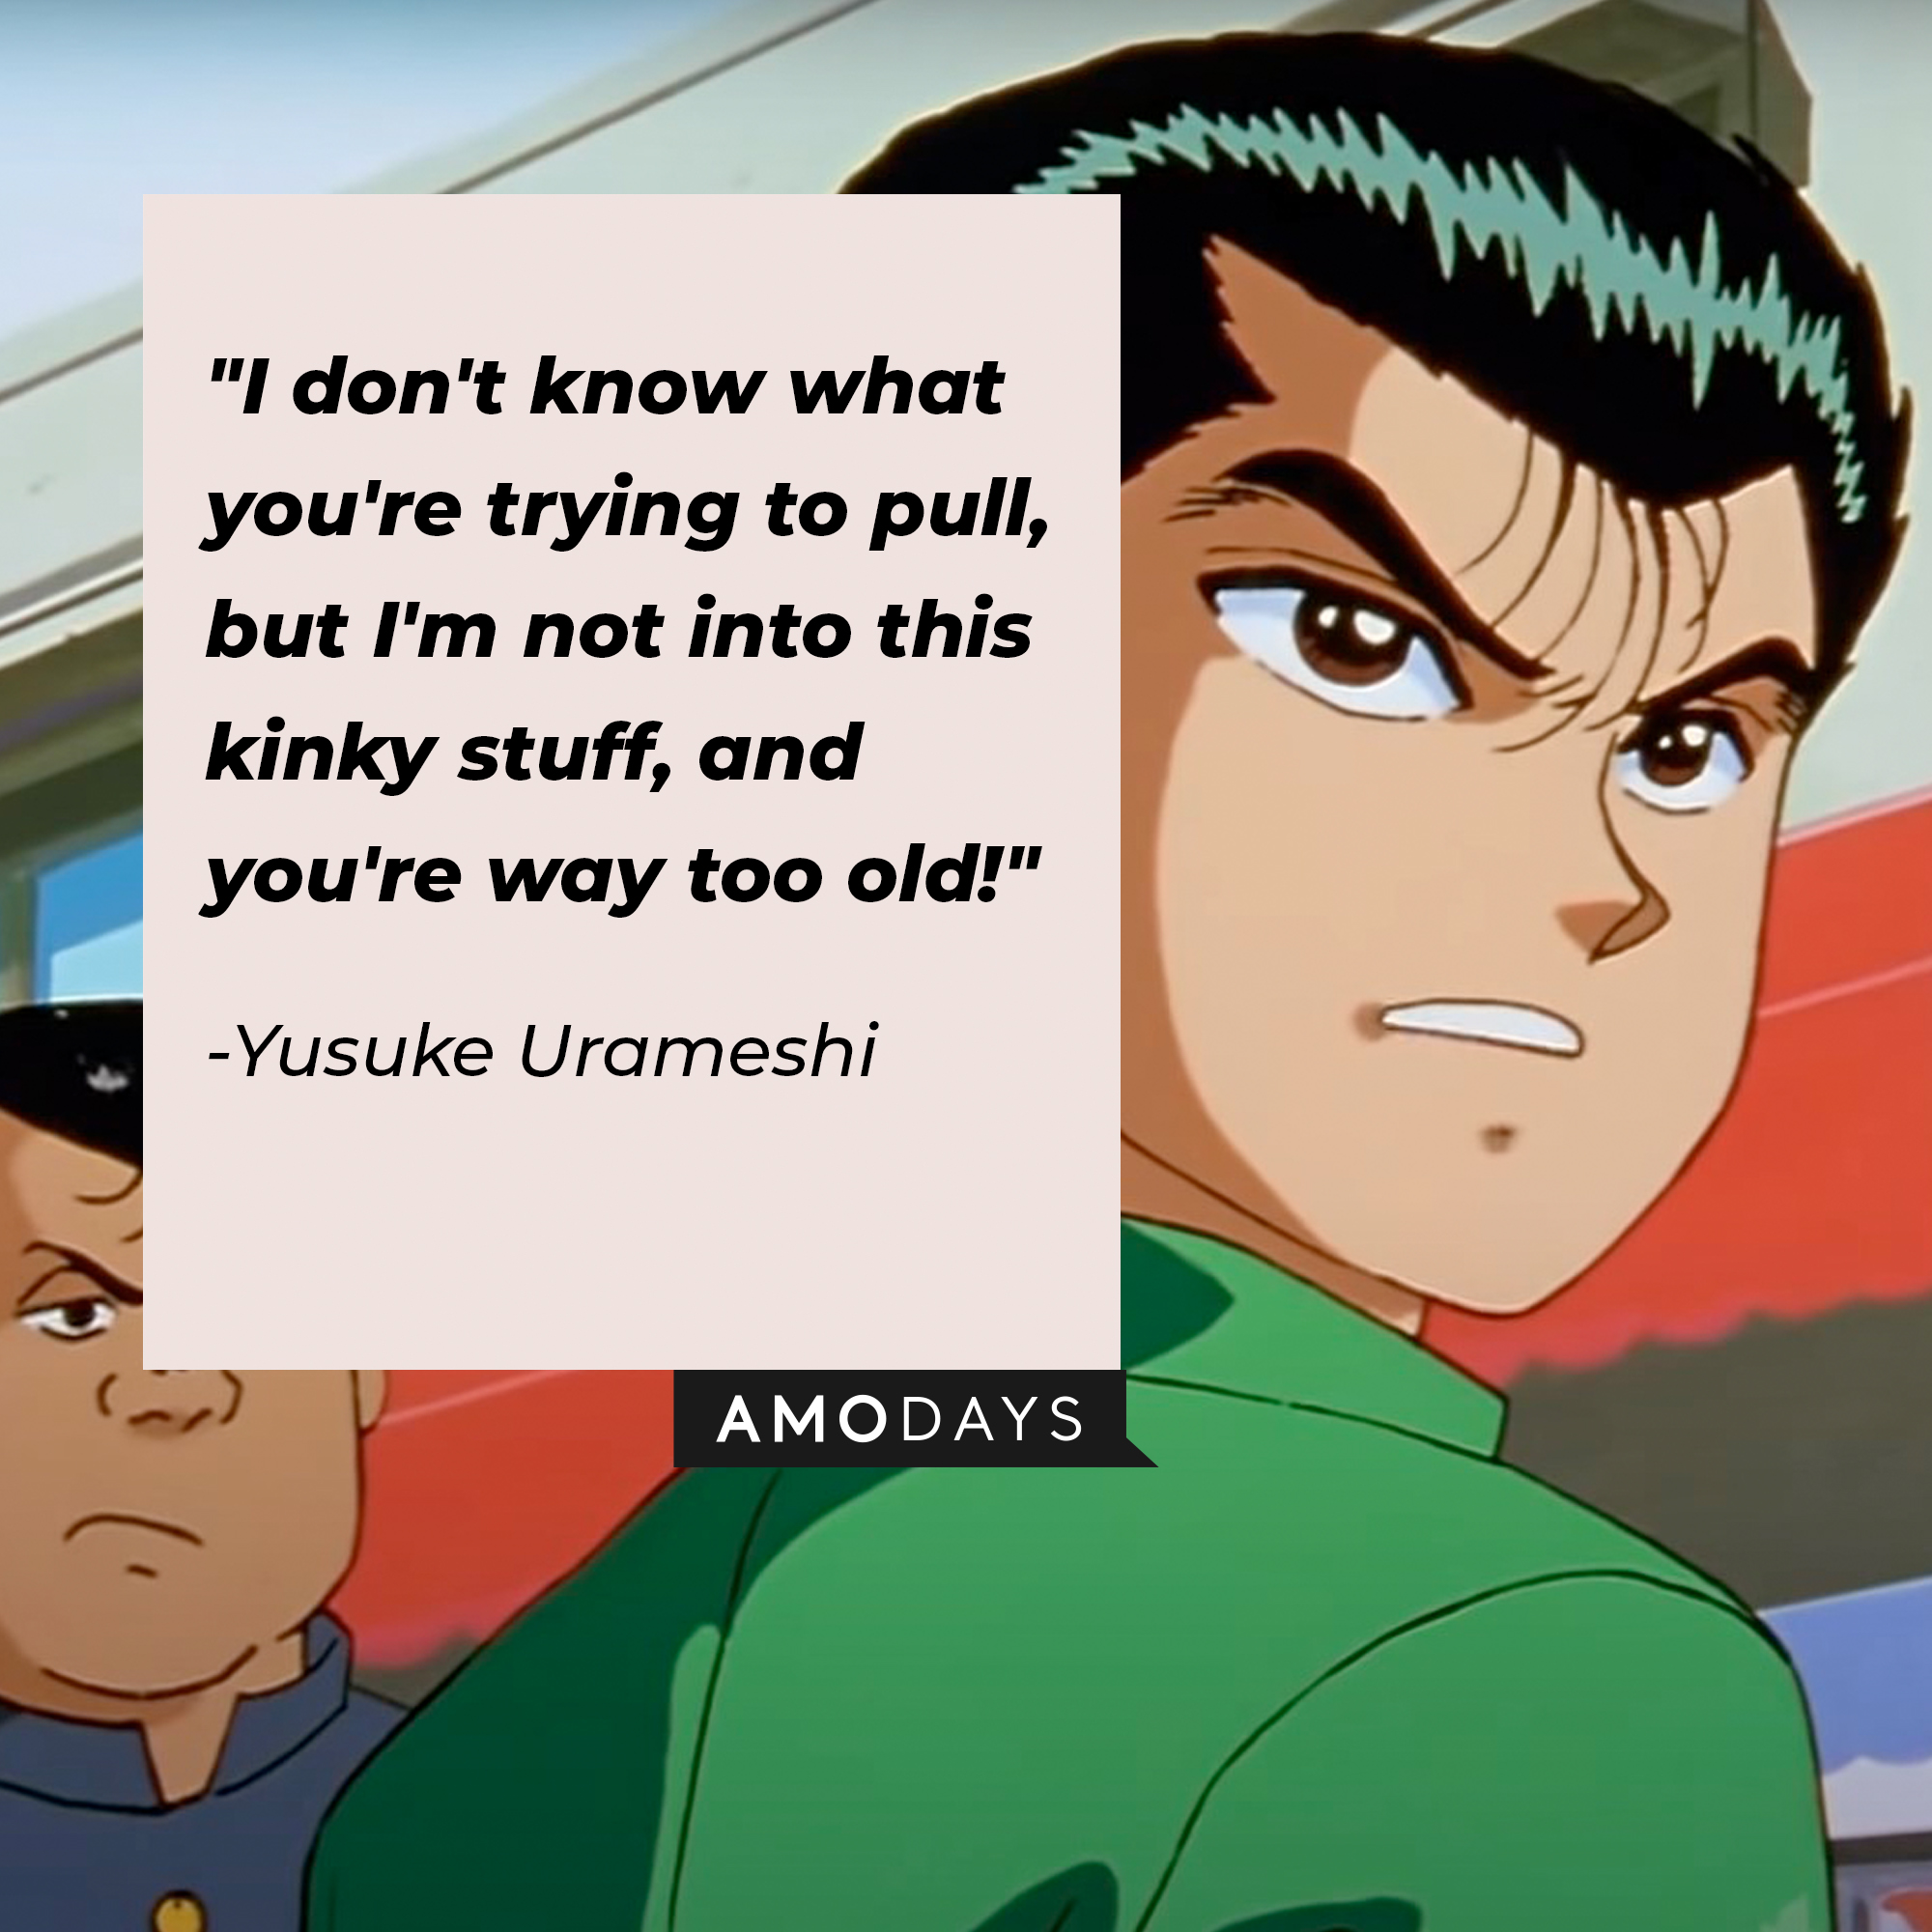 Yusuke Urameshi's quote: "I don't know what you're trying to pull, but I'm not into this kinky stuff, and you're way too old!" | Source: Facebook.com/watchyuyuhakusho